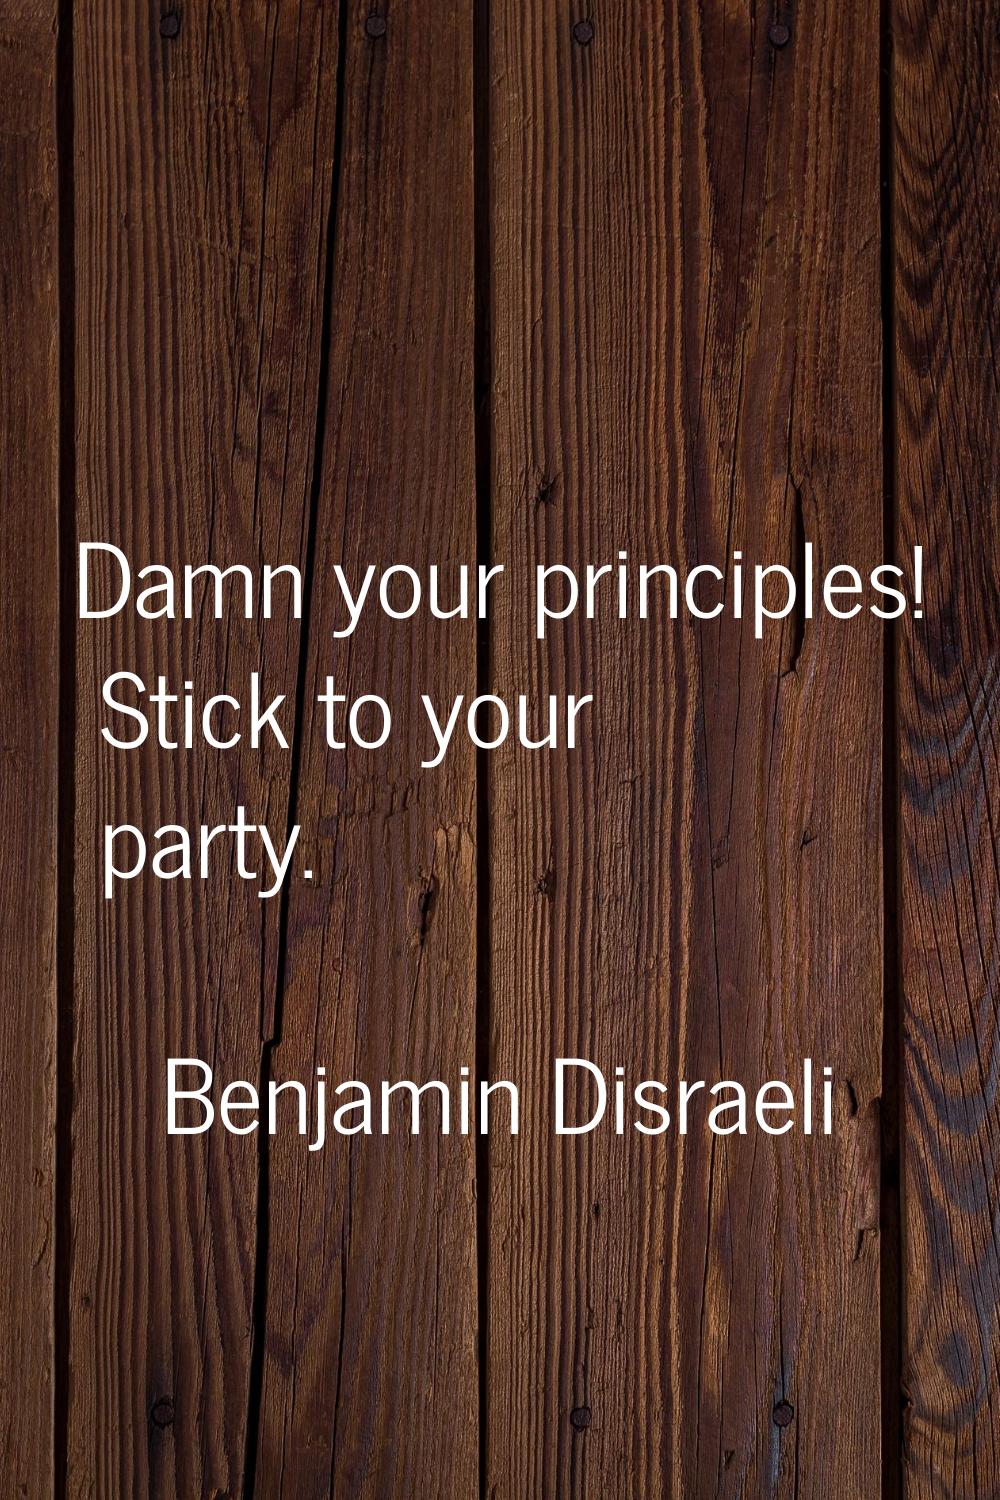 Damn your principles! Stick to your party.